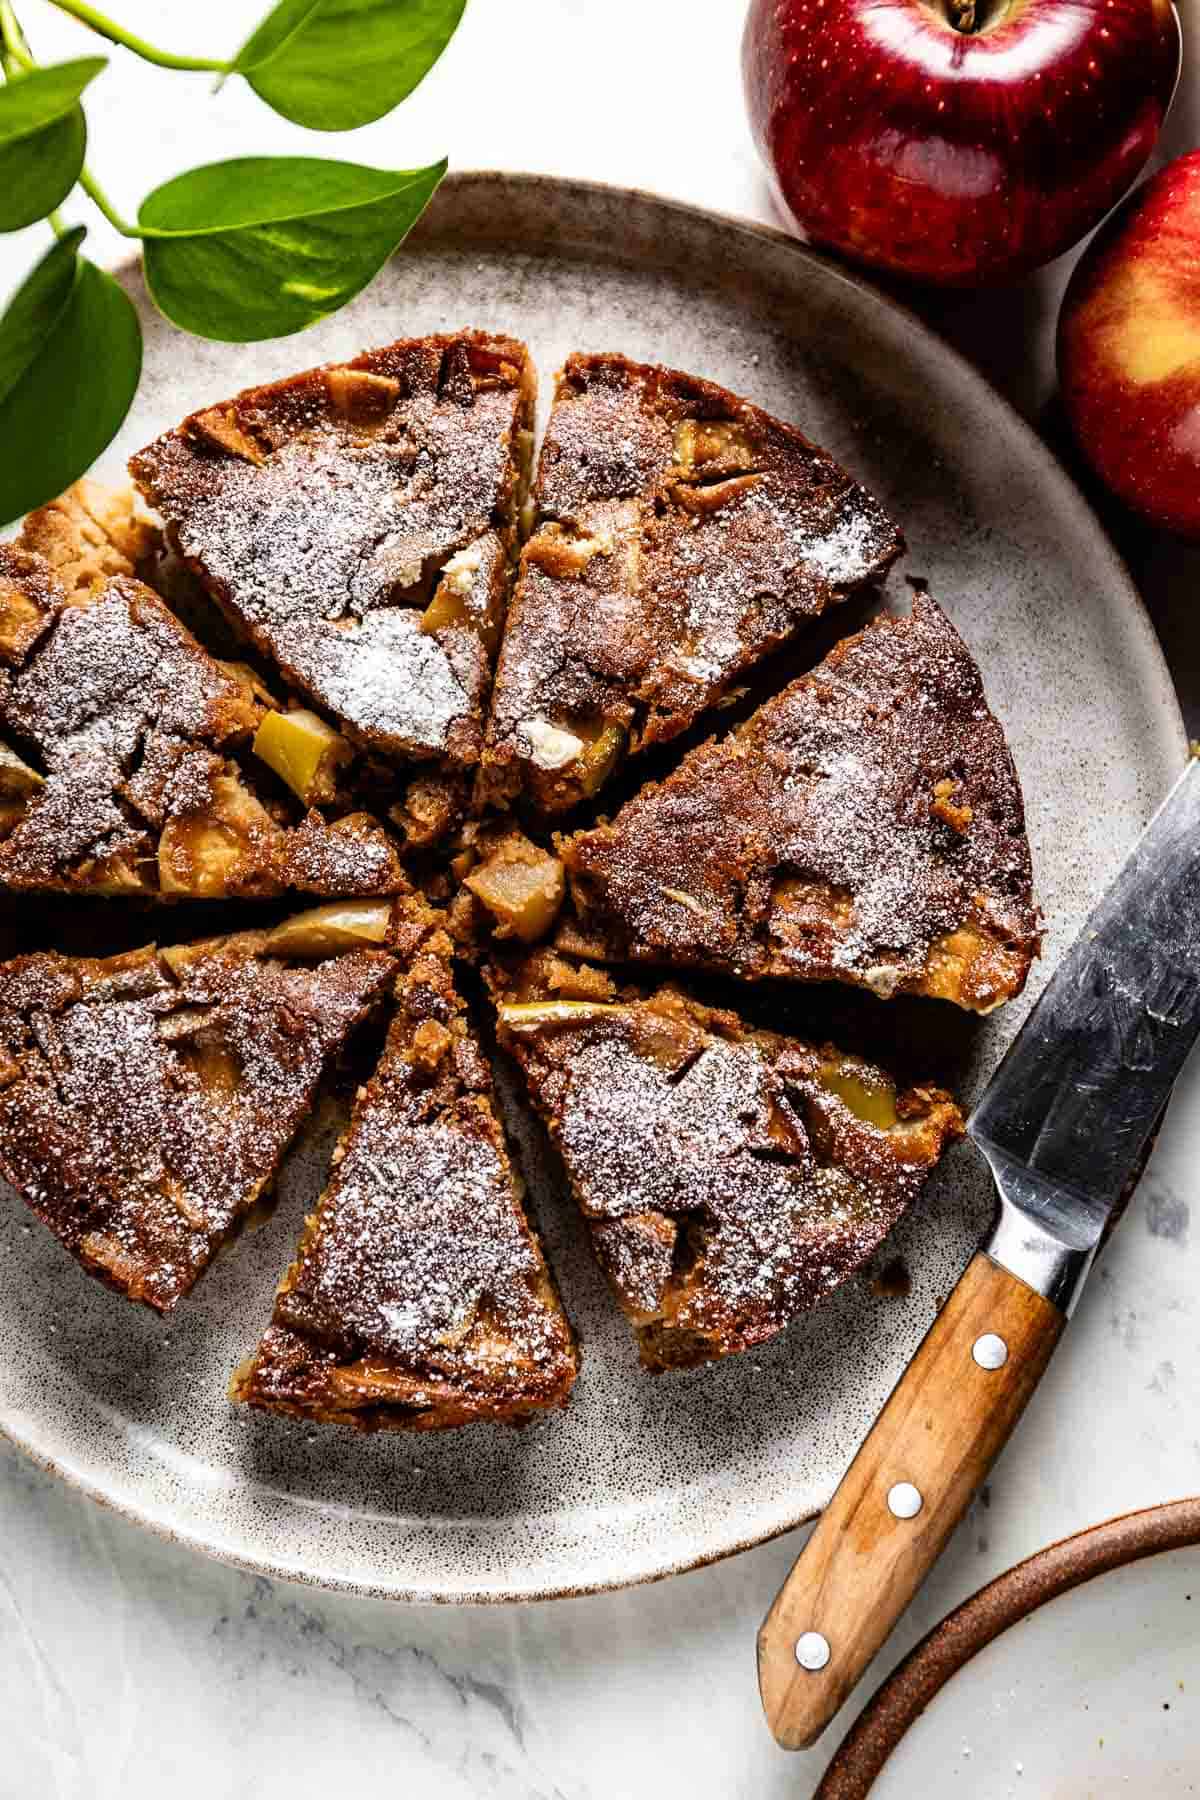 https://foolproofliving.com/wp-content/uploads/2013/12/French-Apple-Cake.jpg